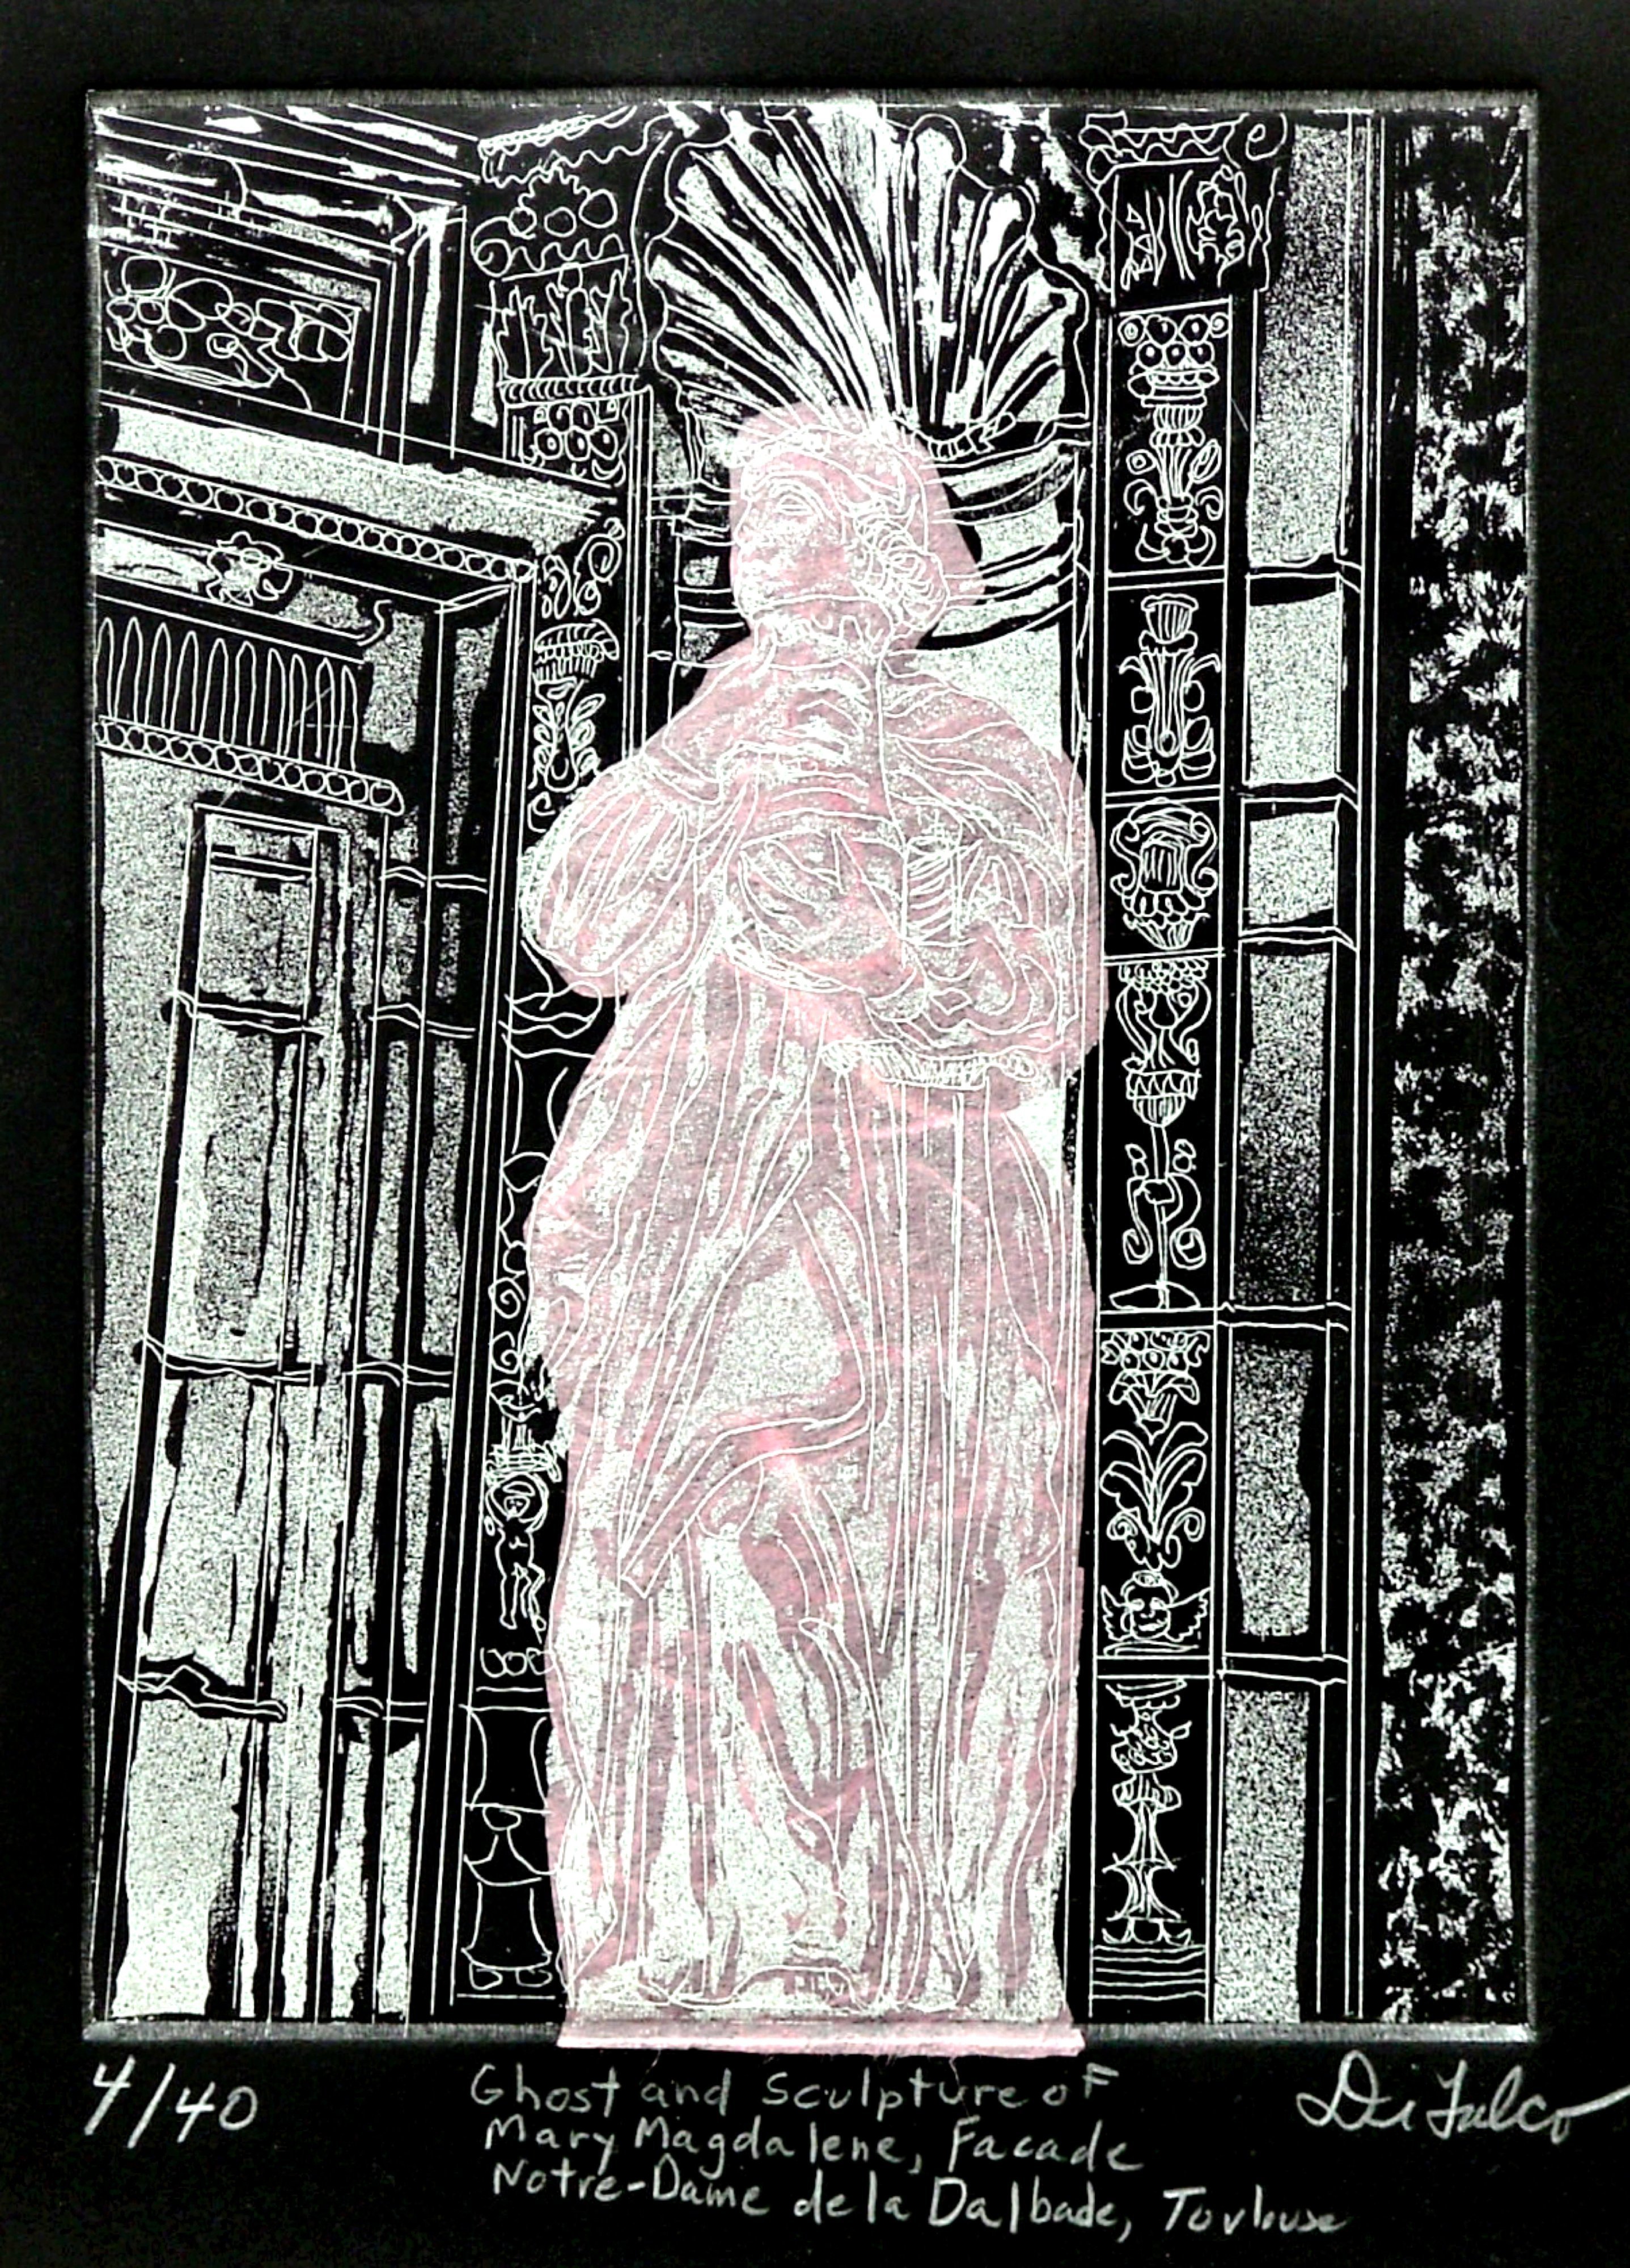 Jerry  Di Falco: 'Mary Magdalene', 2011 Etching, Mystical. This etching entitled, Ghost and Sculpture of Mary Magdalene, Facade, Notre Dame de la Dalbade, Toulouse, used the techniques of aquatint, intaglio, and, chine colle, which is a process of applying a cellulose coated mulberry bark paper directly onto the printing plate before running it through the press. The work ...